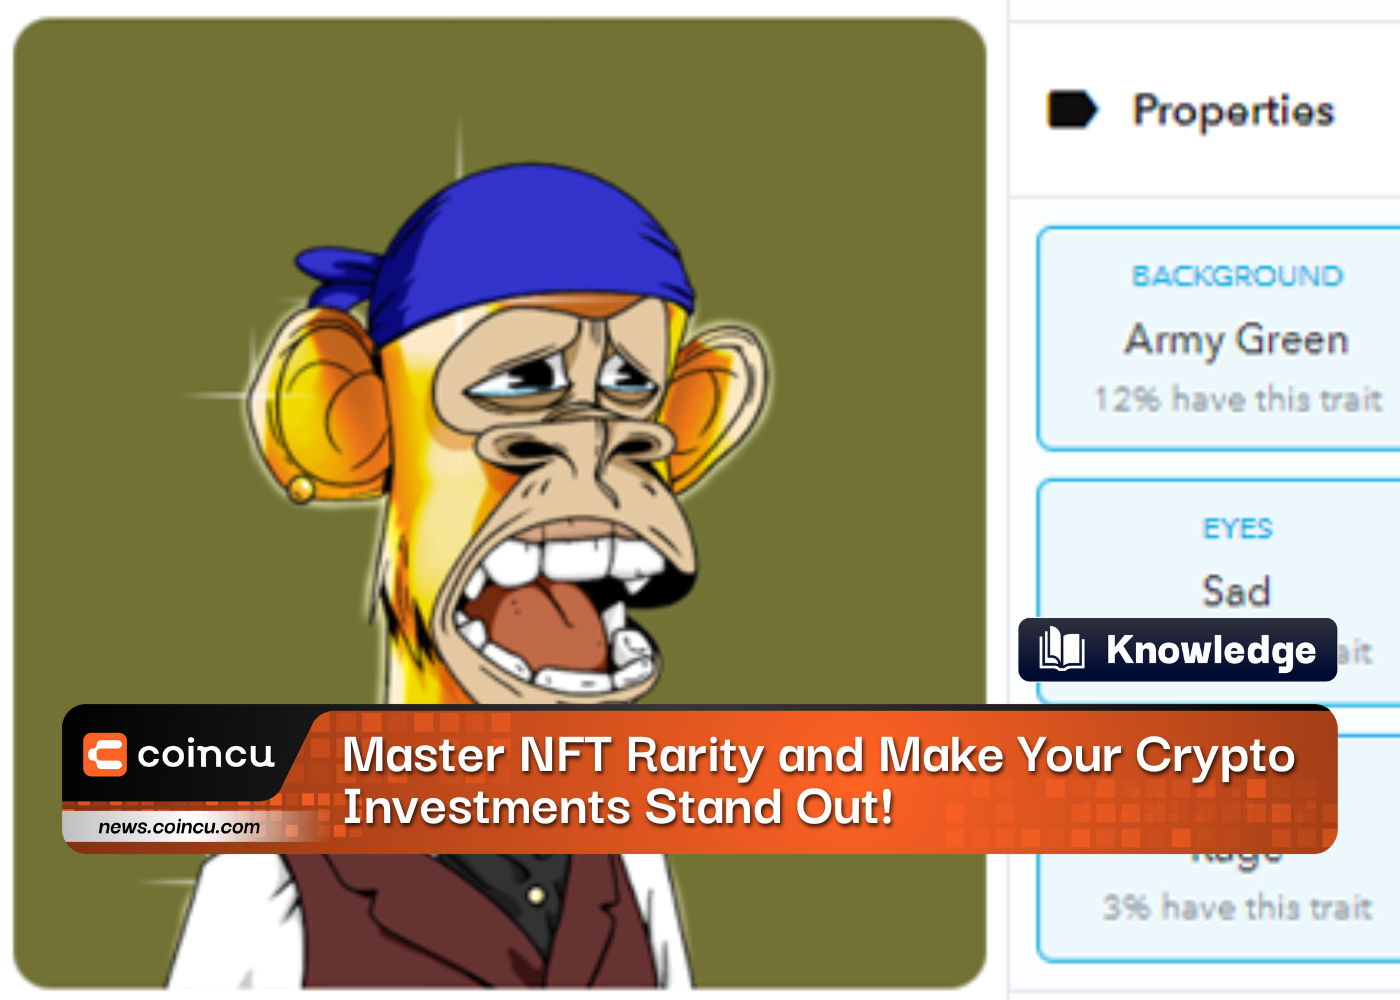 Master NFT Rarity and Make Your Crypto